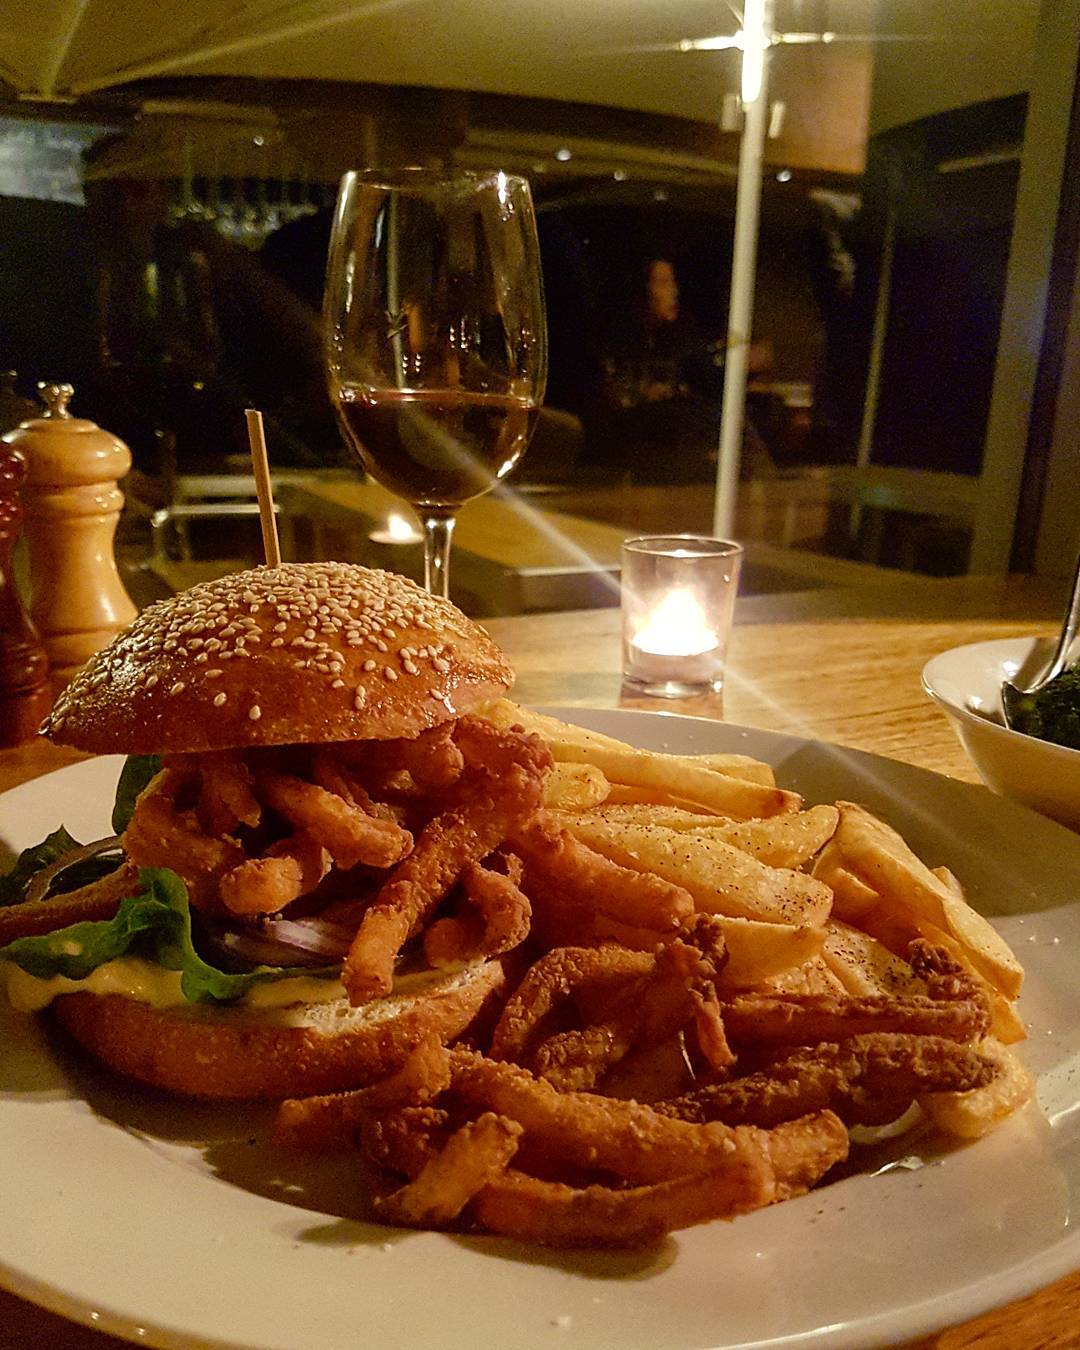 Friday night squid burger. Keep an eye out for our specials board for crafty creations like this one!
?: @_tomsandy #woodbridge #tasmania #squid #burger #tasfoodie #peppermintbay